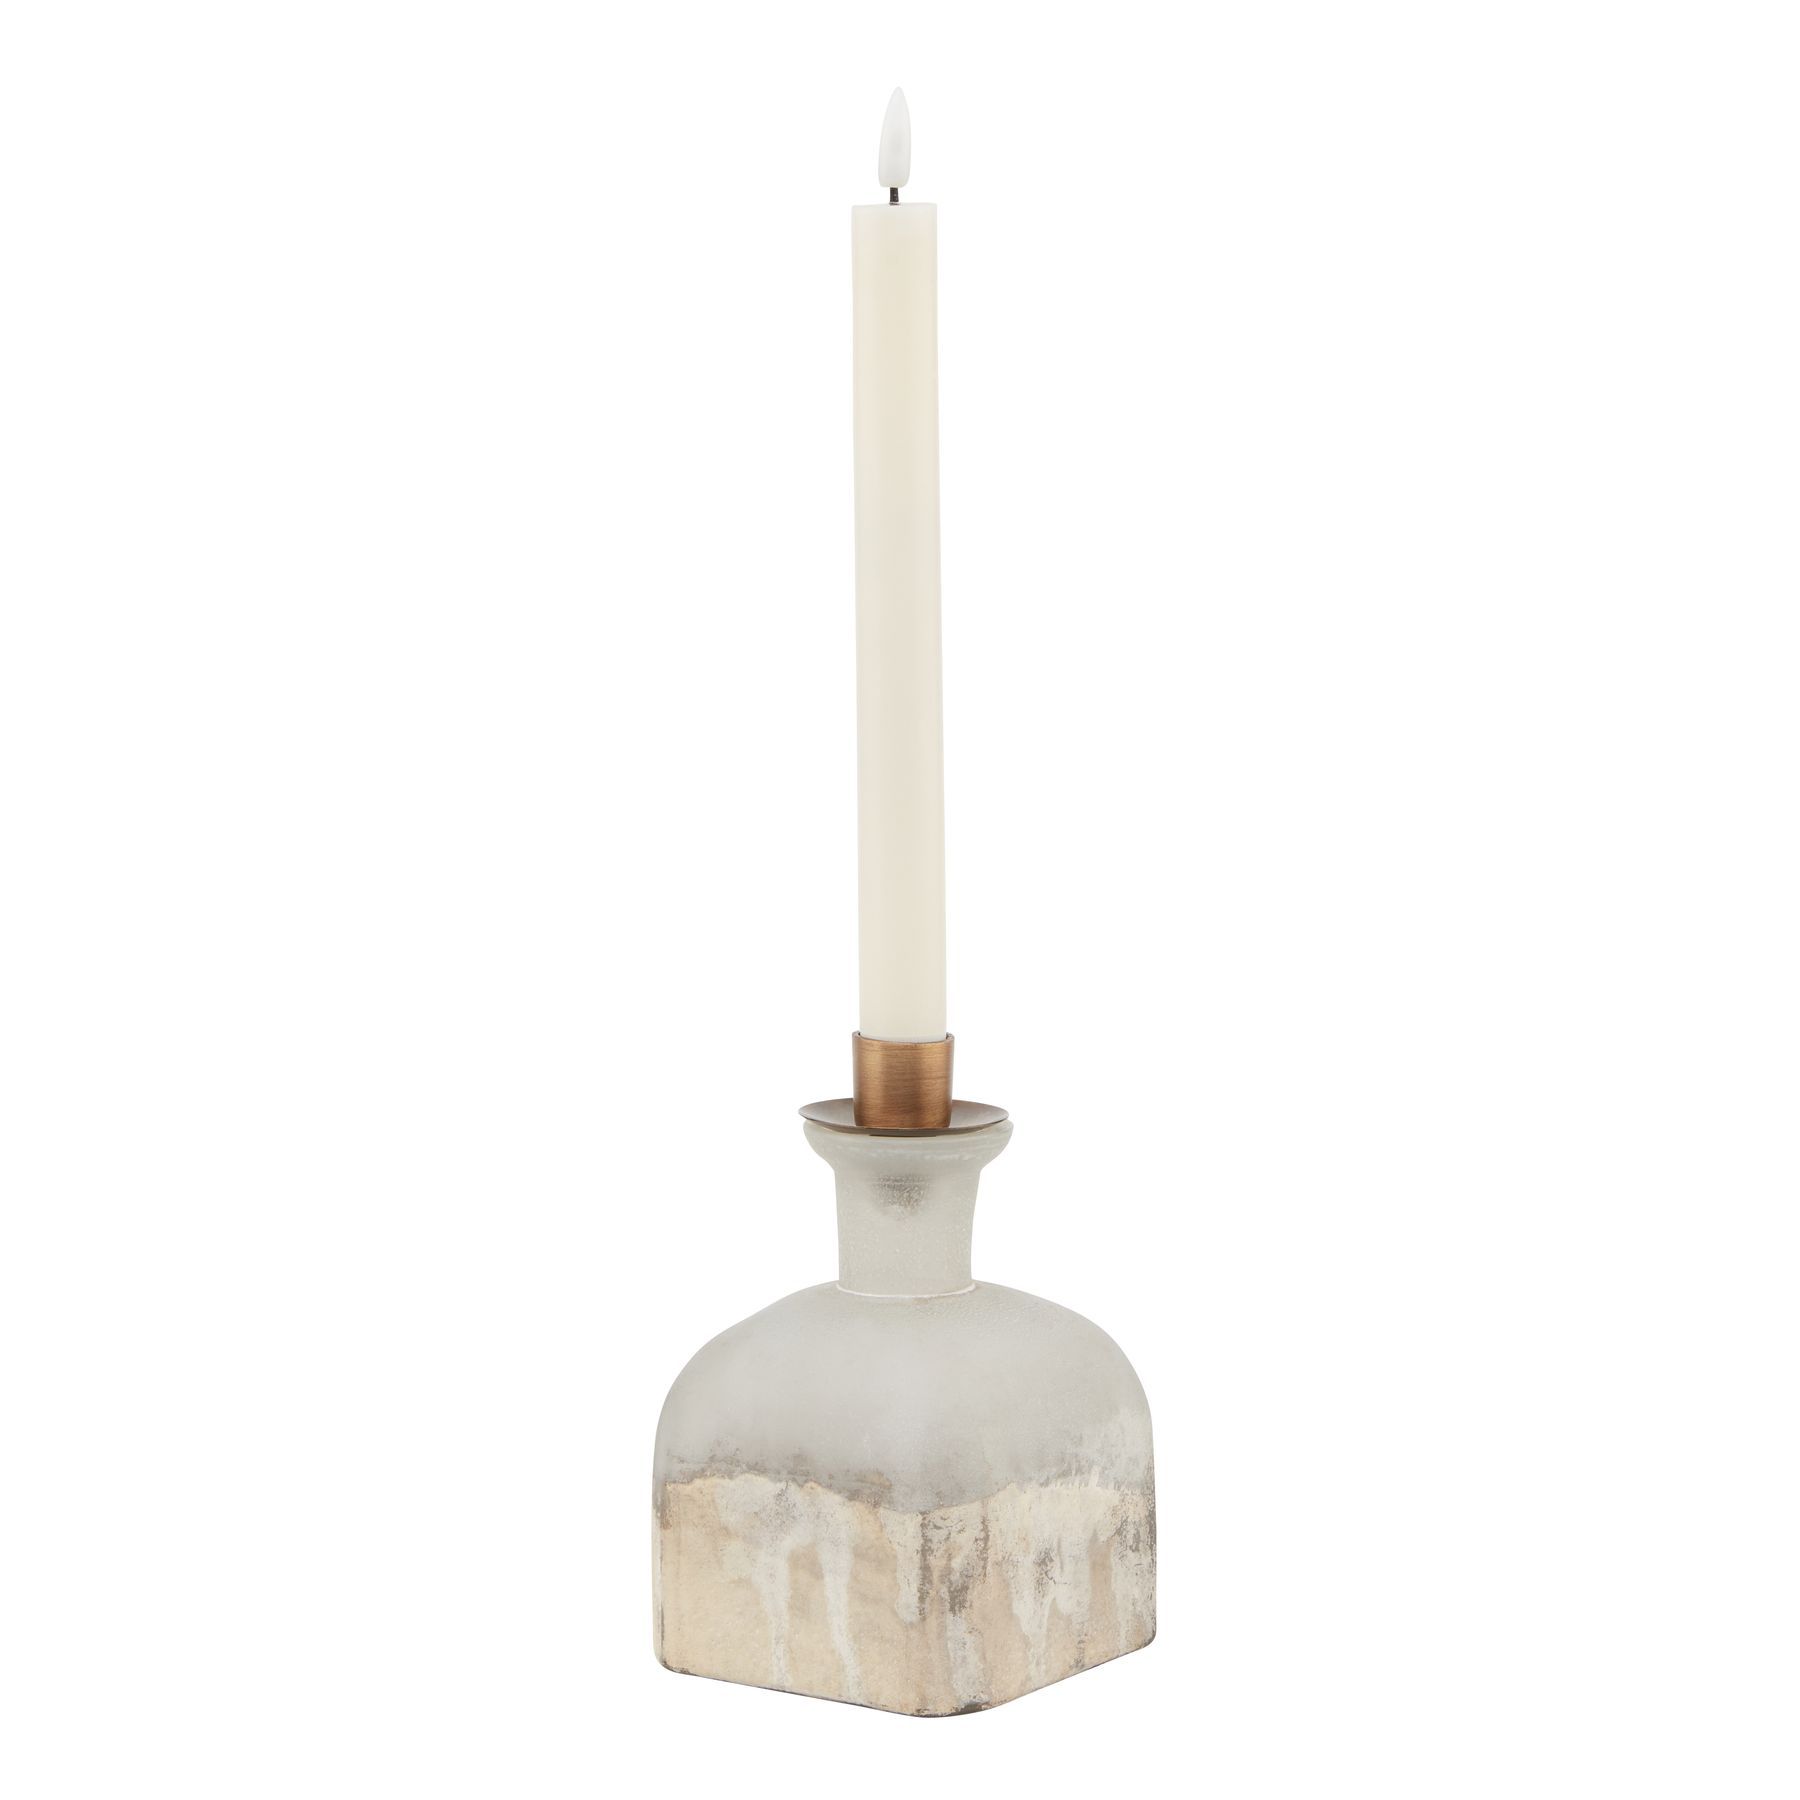 Burnished Dipped and Aged Brass Candle Holder Vase - Image 1